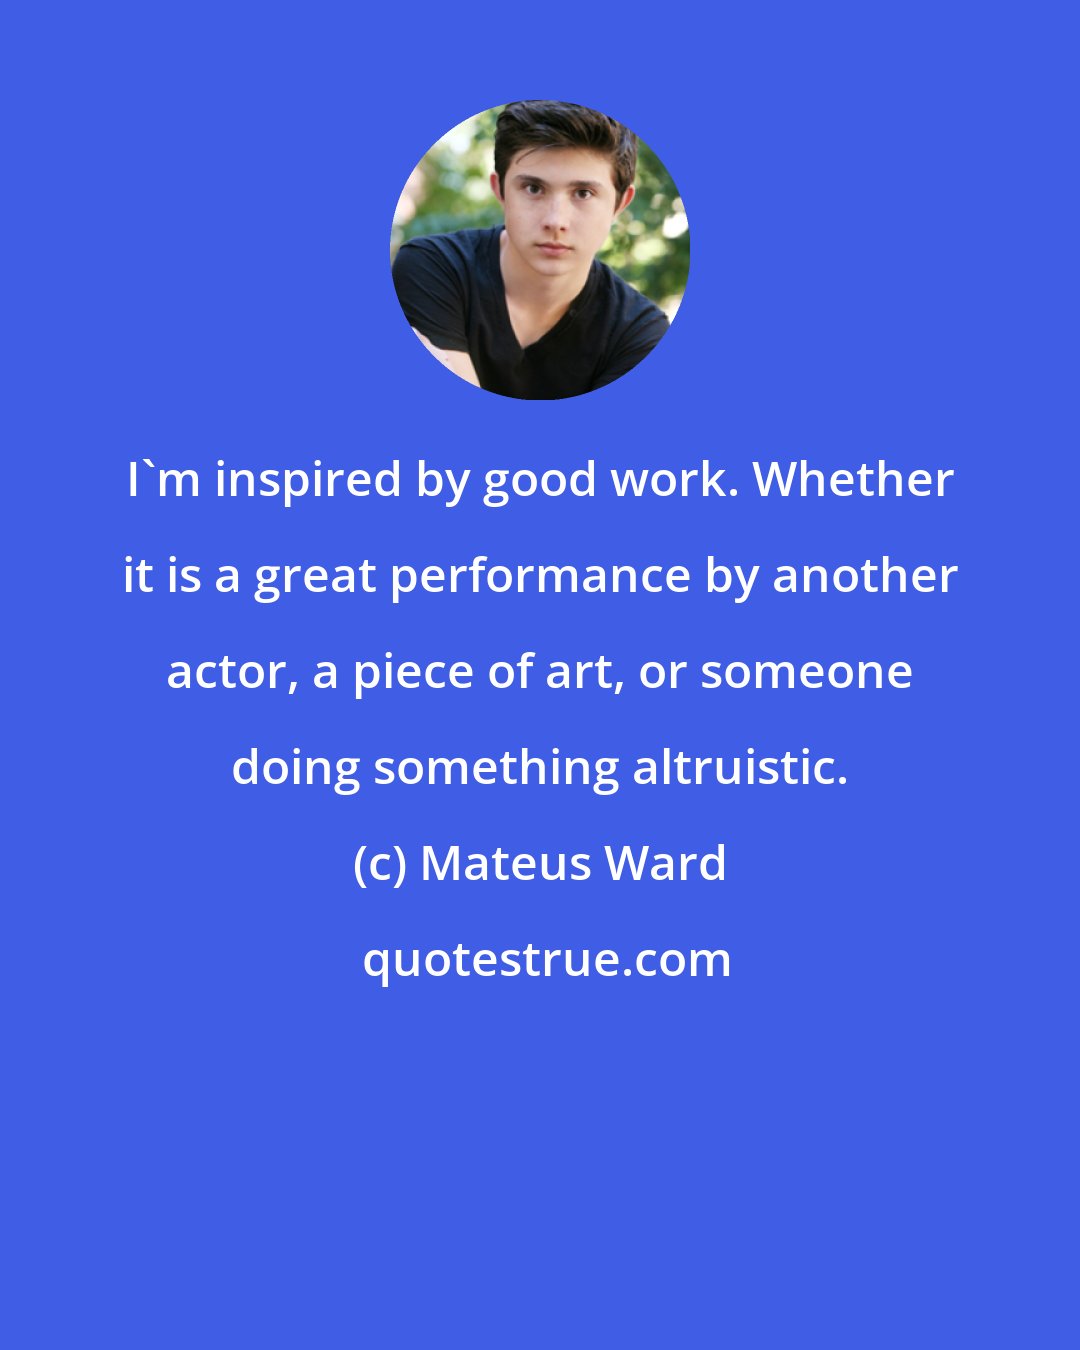 Mateus Ward: I'm inspired by good work. Whether it is a great performance by another actor, a piece of art, or someone doing something altruistic.